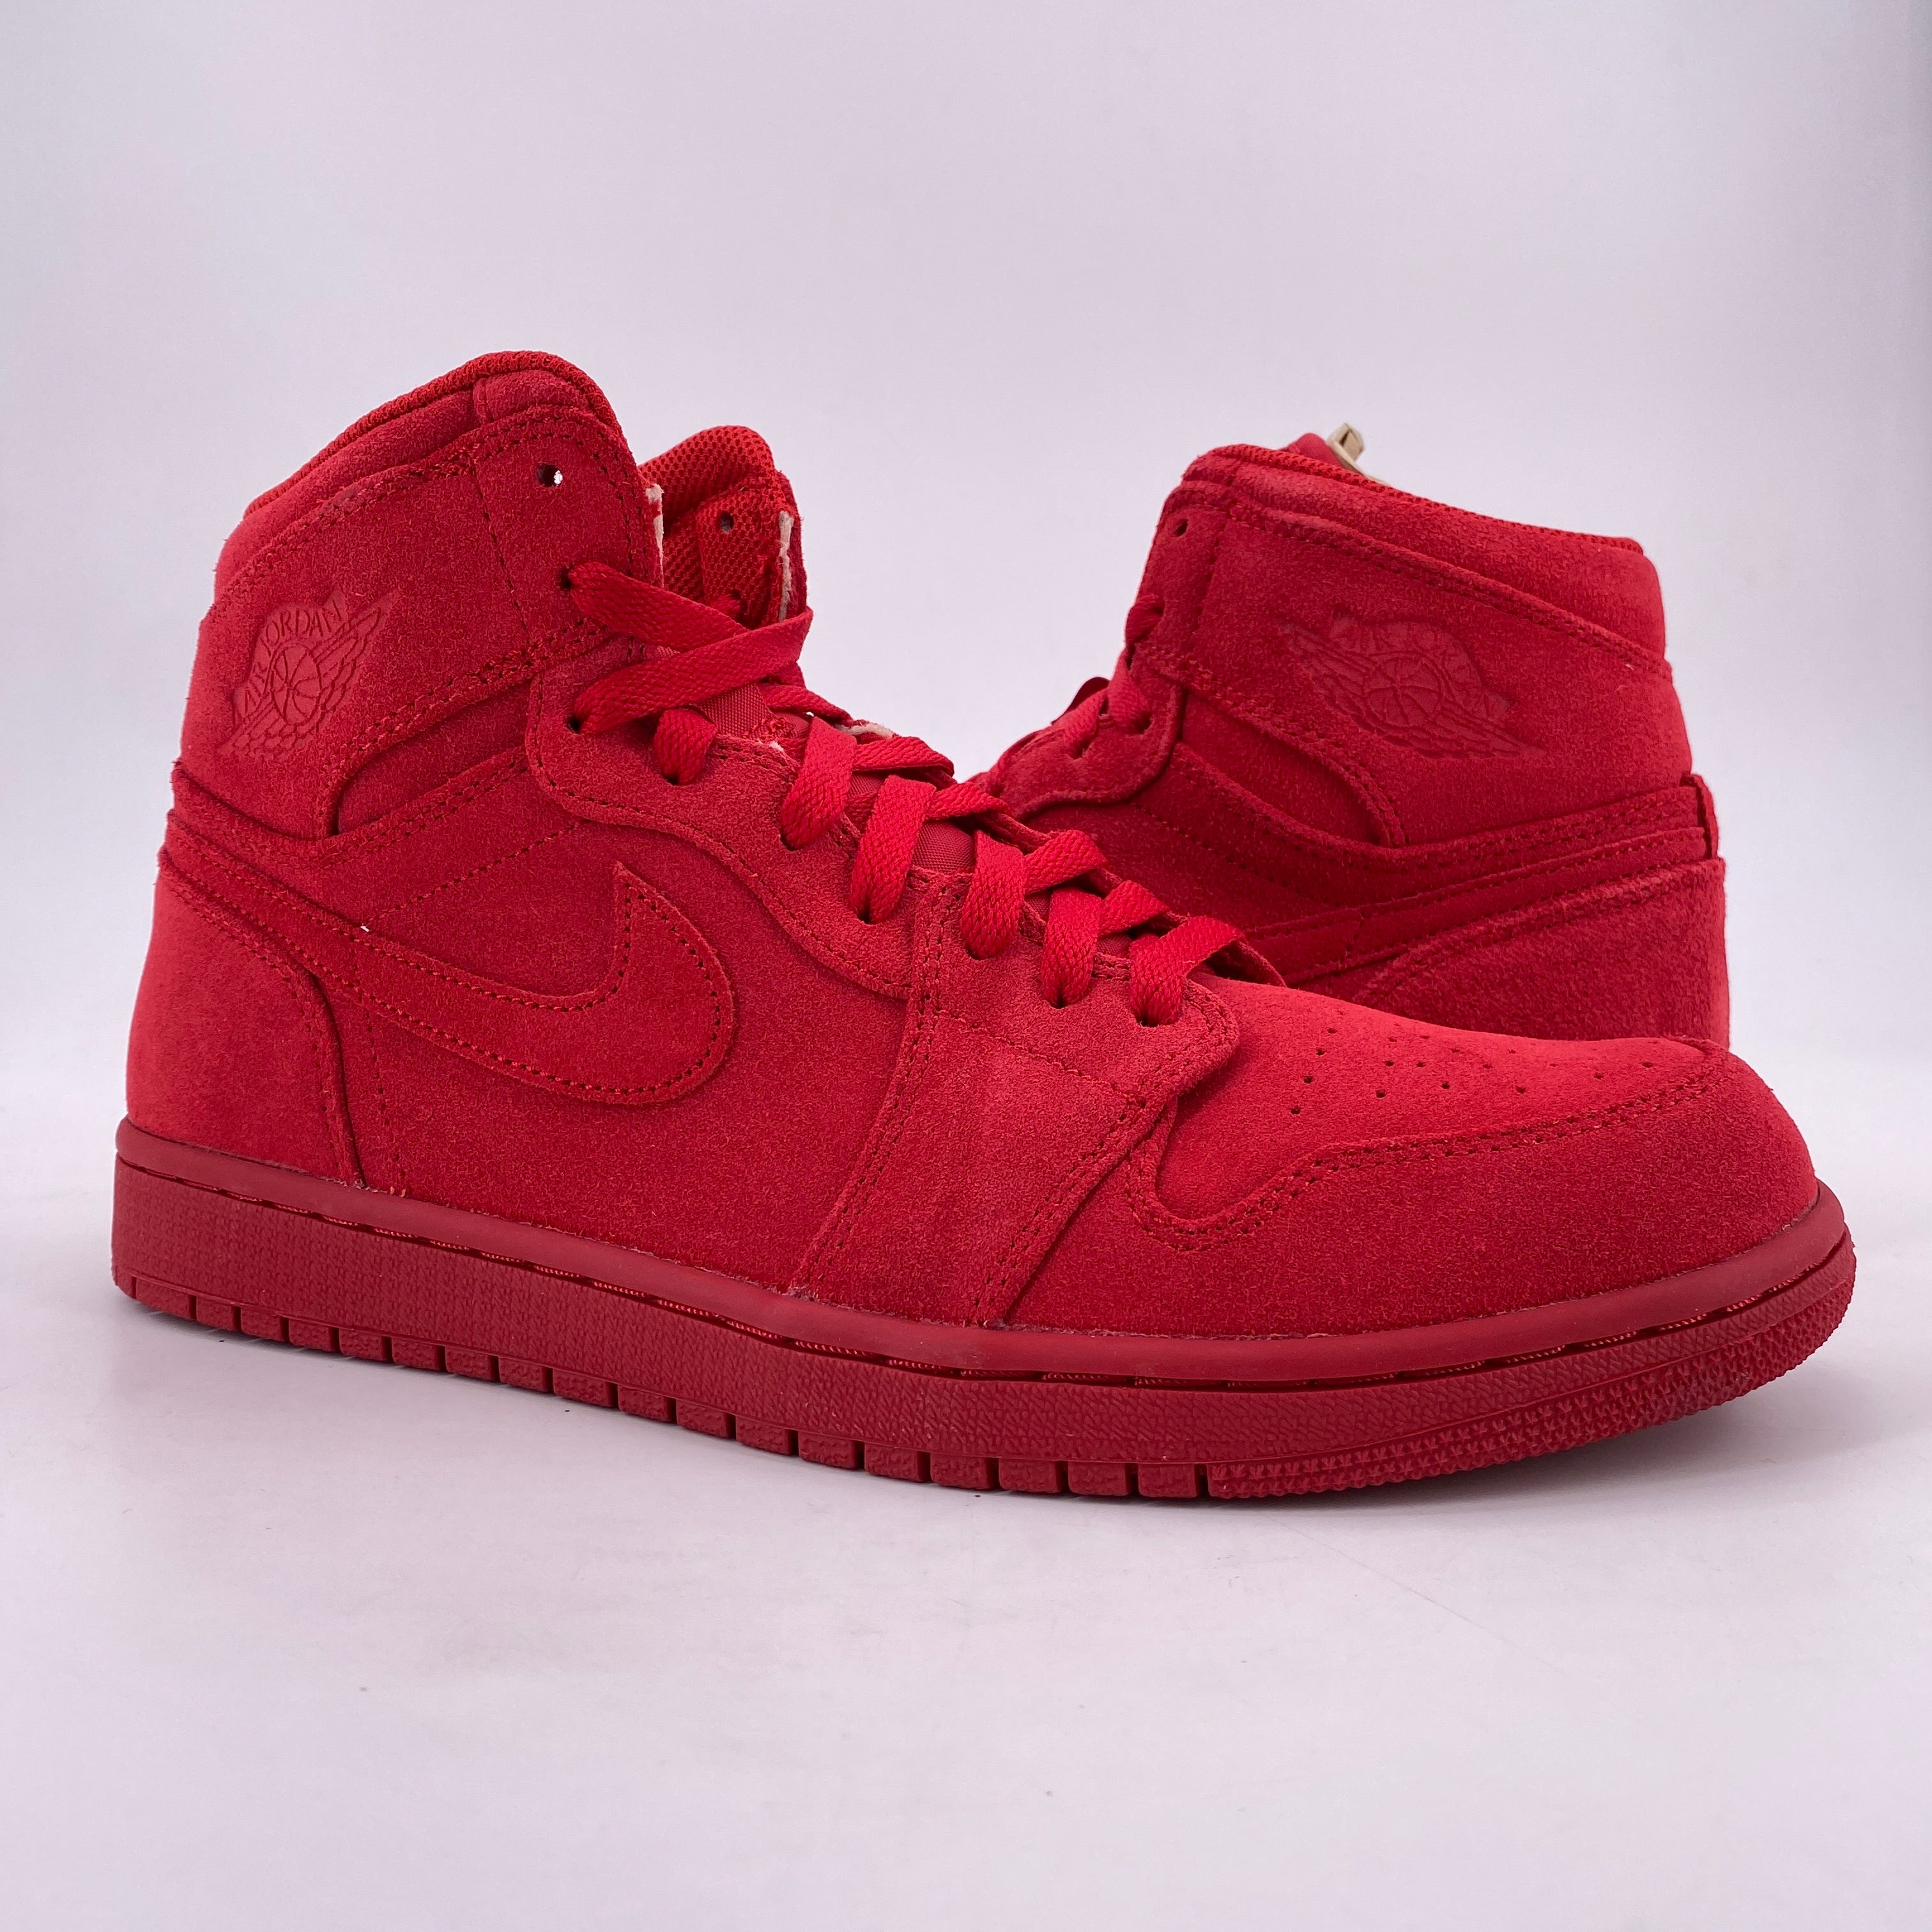 Air Jordan 1 Retro High &quot;Red Suede&quot; 2017 New Size 10.5